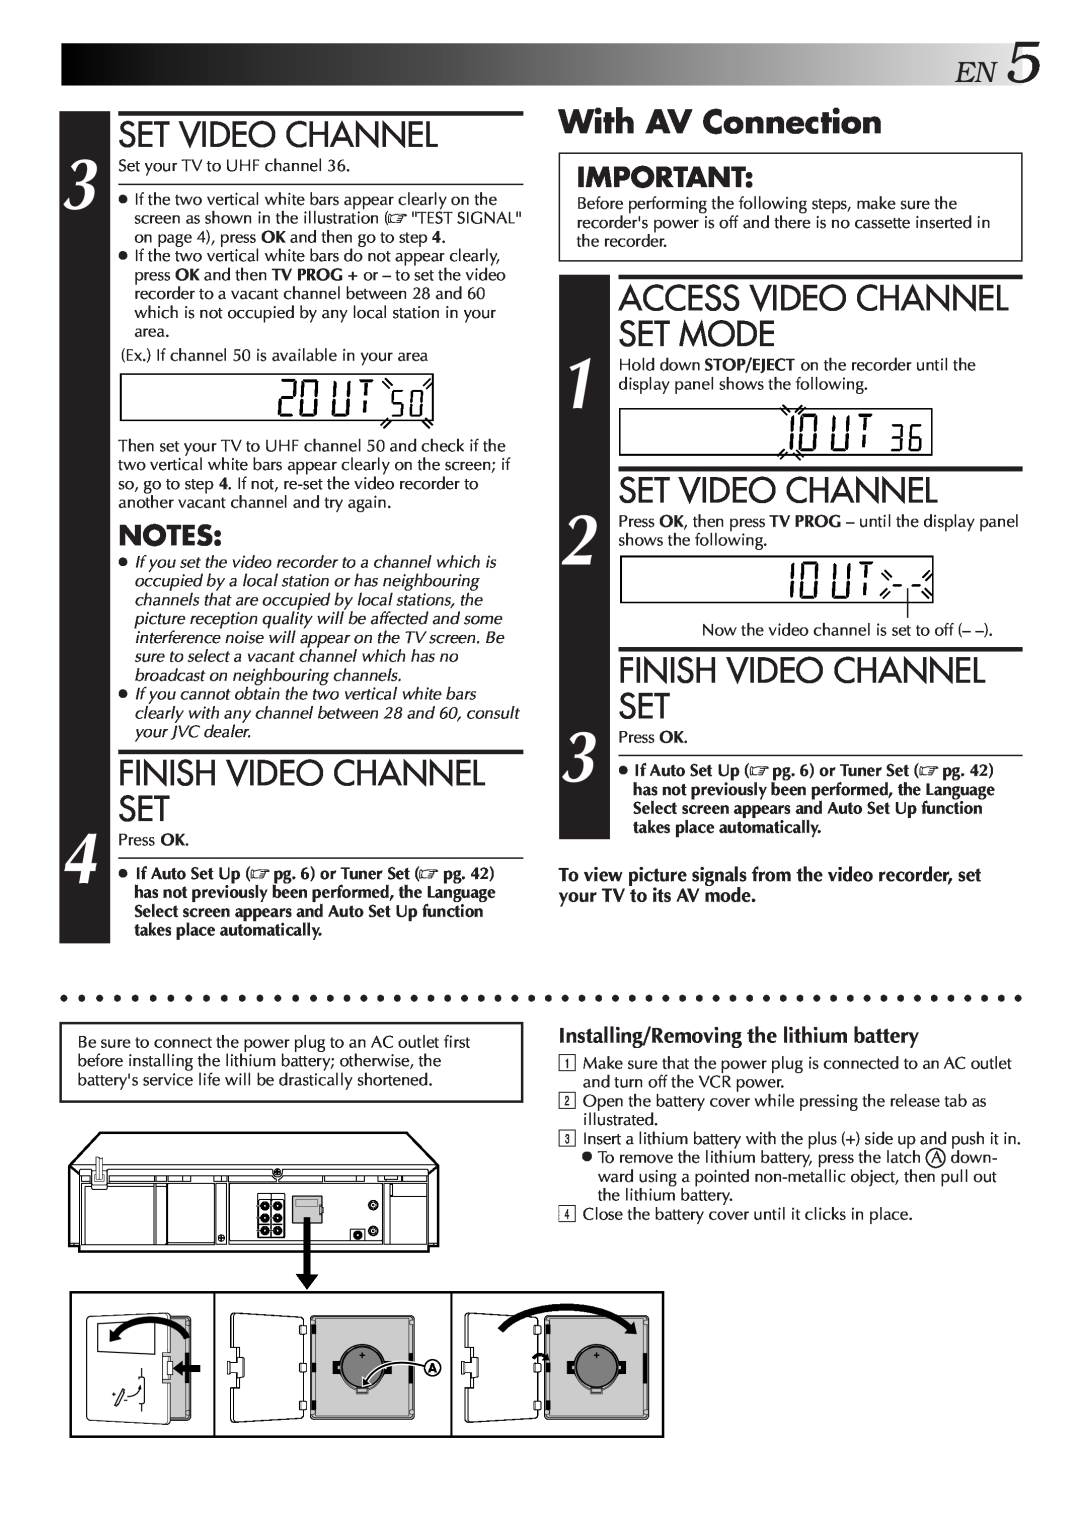 JVC HR-DD857MS Set Video Channel, Finish Video Channel Set, With AV Connection, Access Video Channel Set Mode 